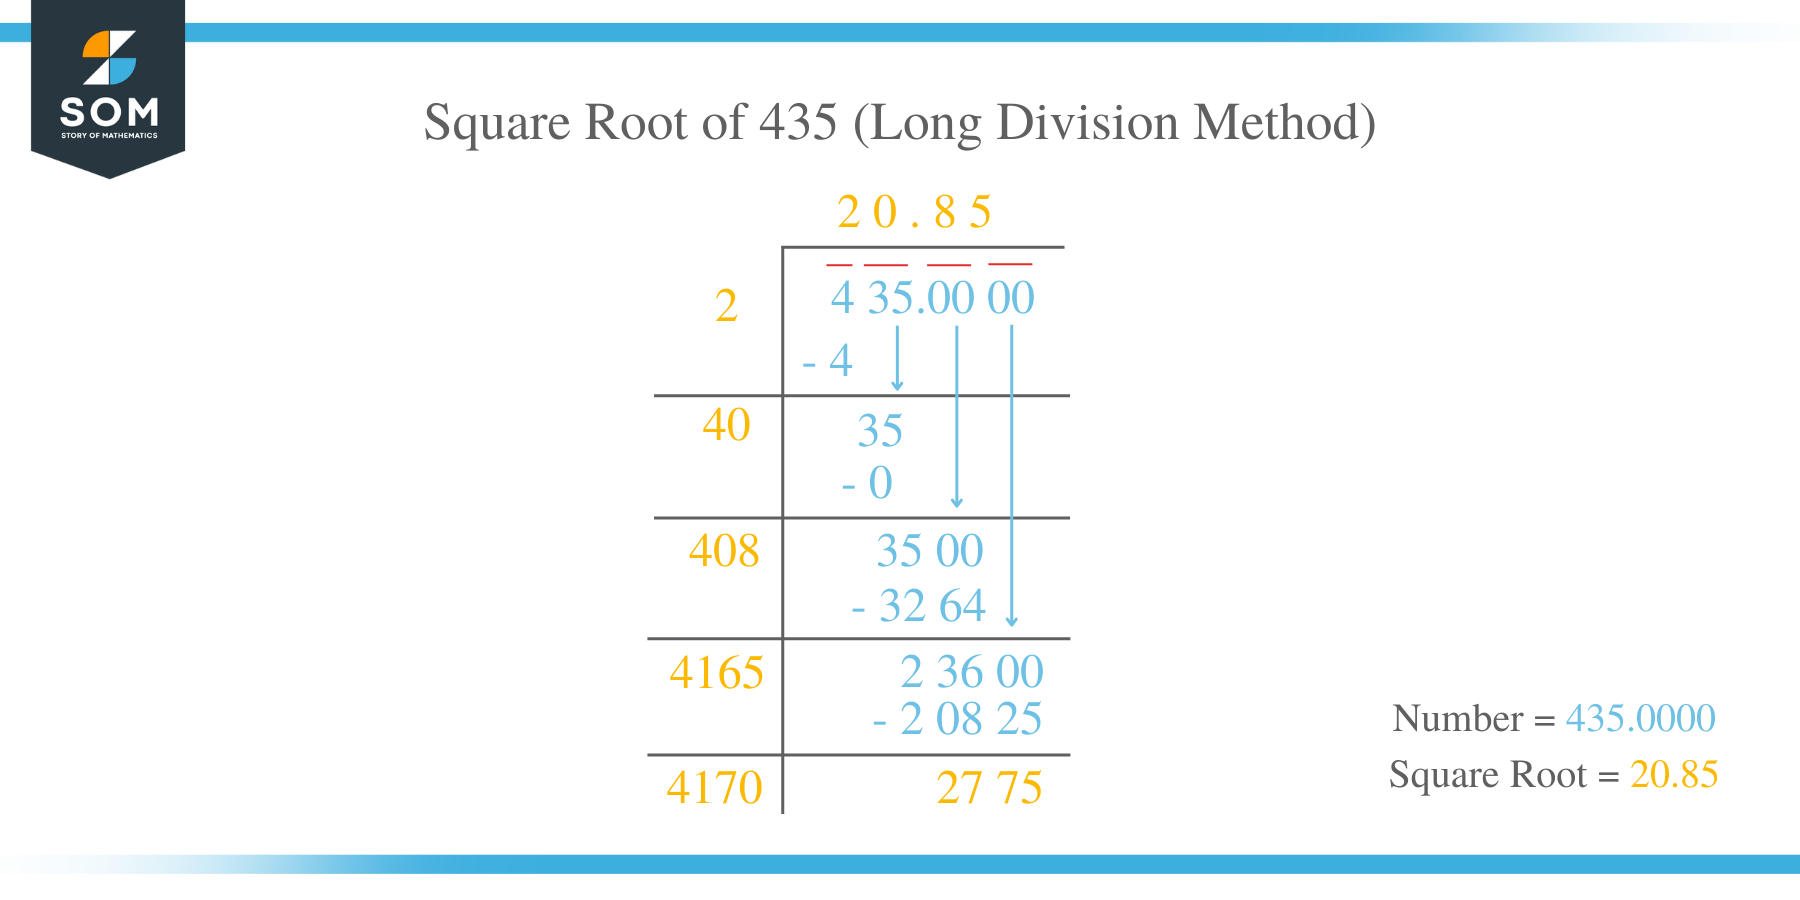 Square Root of 435 by Long Division Method